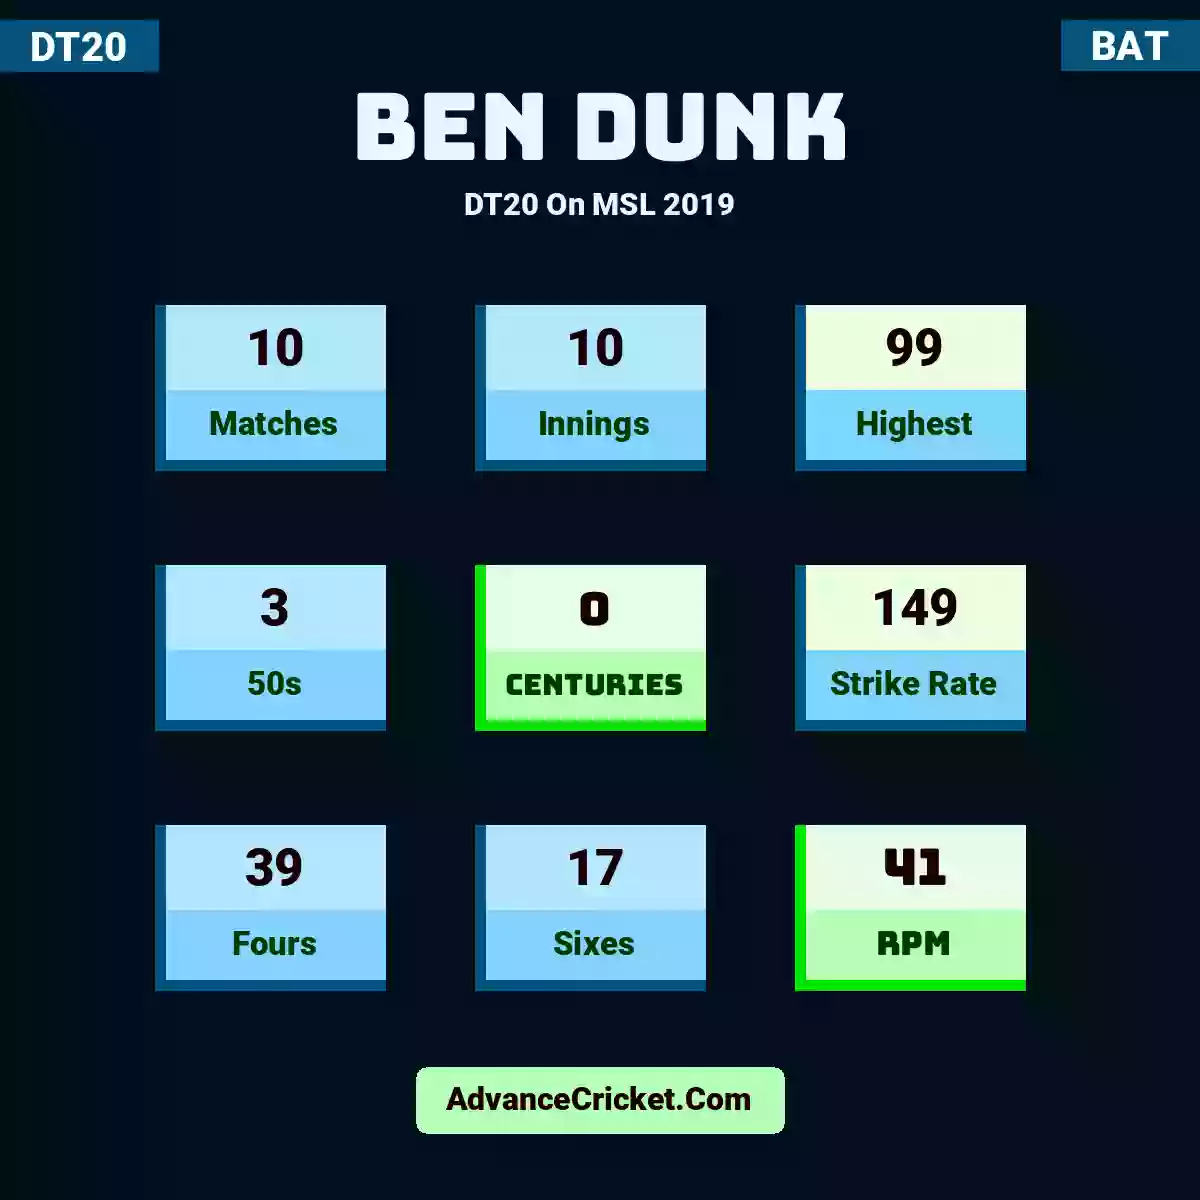 Ben Dunk DT20  On MSL 2019, Ben Dunk played 10 matches, scored 99 runs as highest, 3 half-centuries, and 0 centuries, with a strike rate of 149. B.Dunk hit 39 fours and 17 sixes, with an RPM of 41.